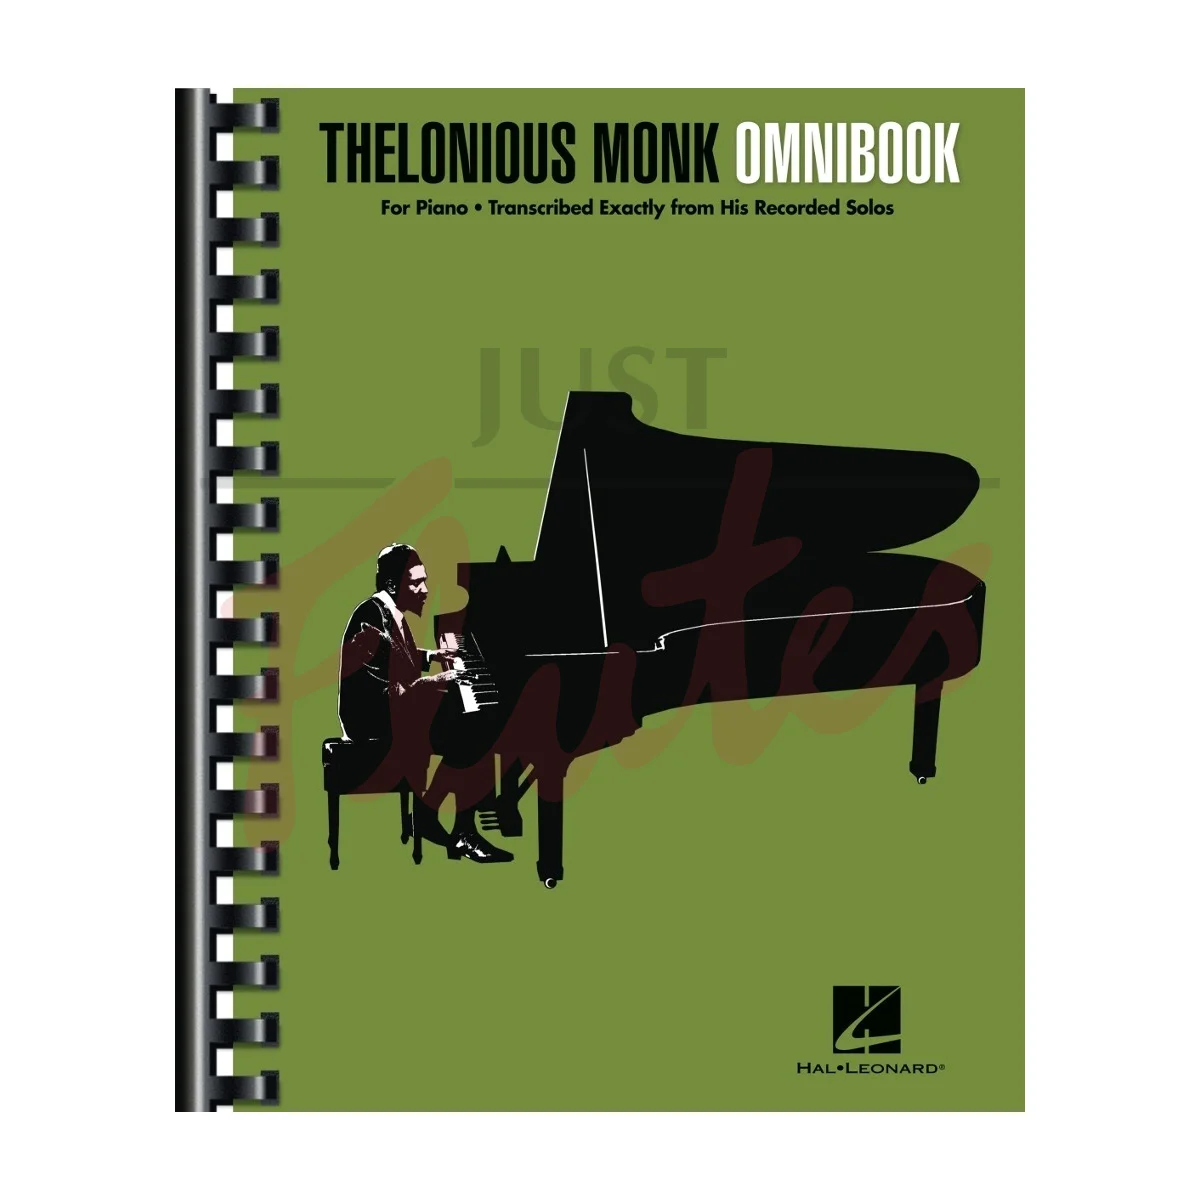 Thelonious Monk Omnibook for Piano